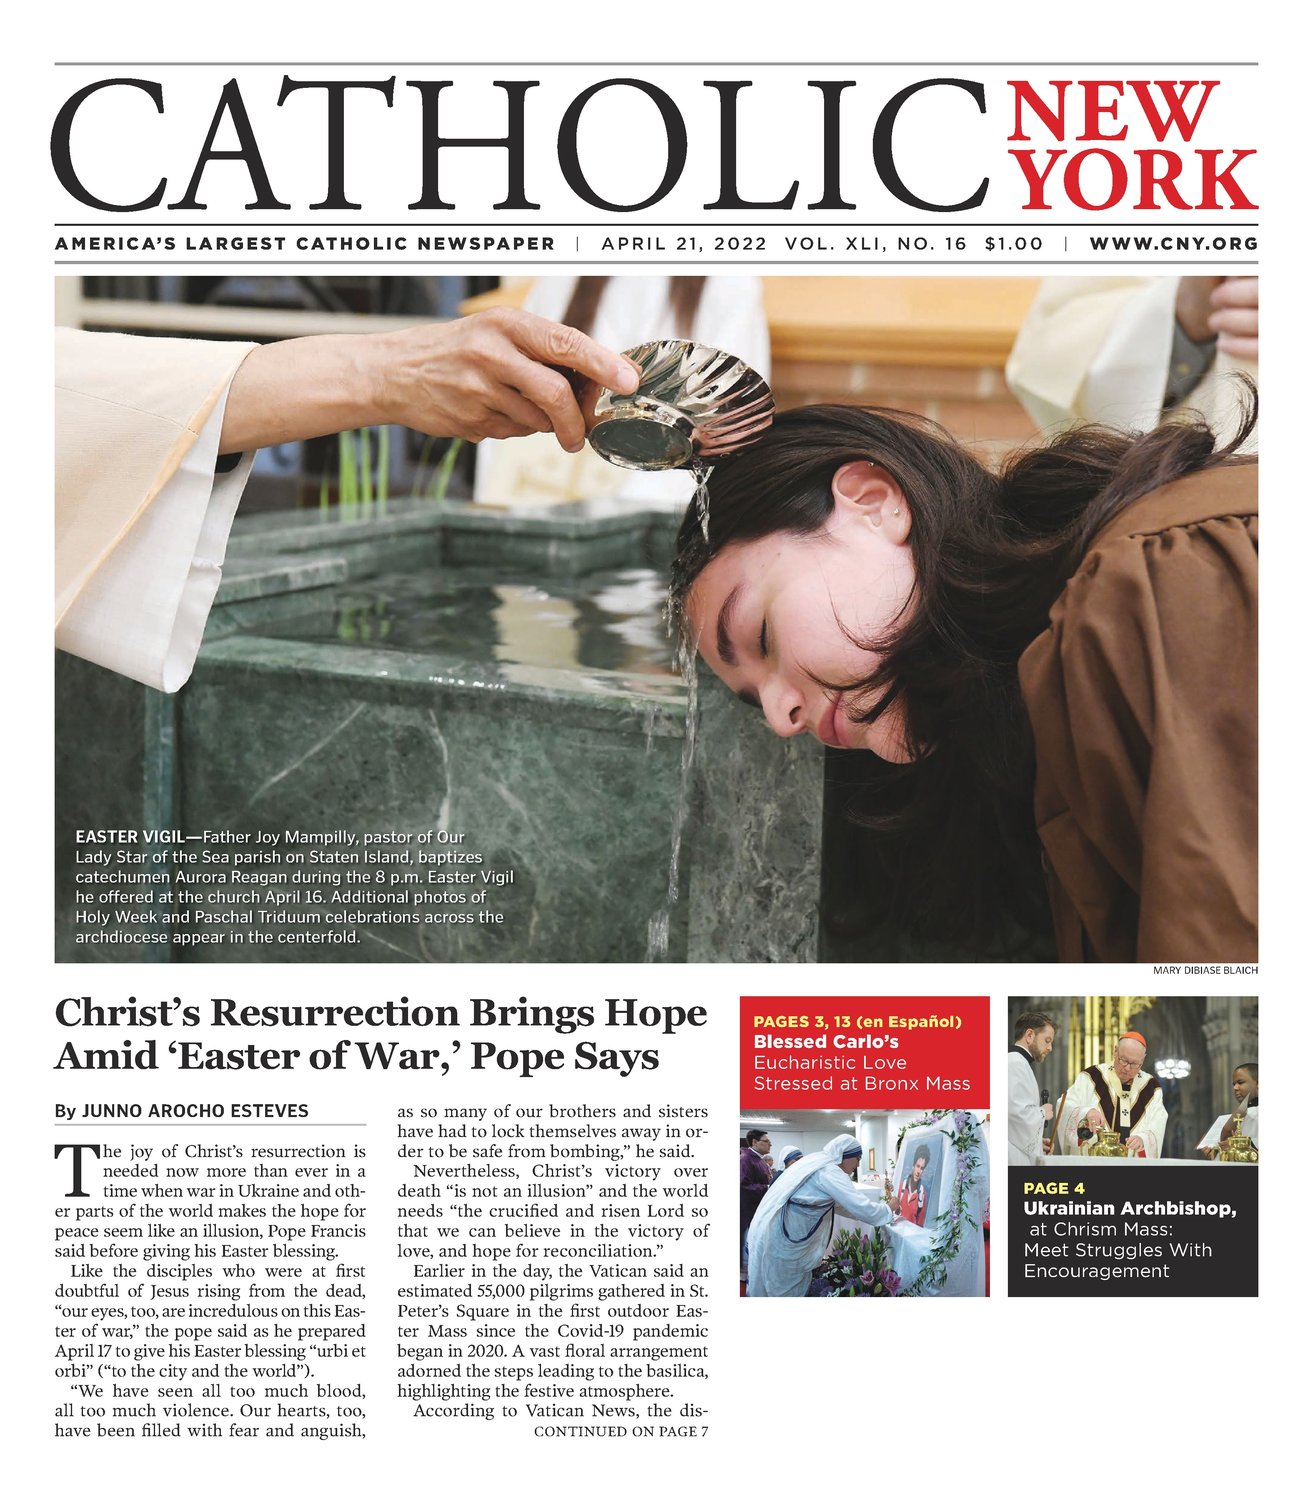 The issue of April 21, 2022 features a striking baptism photo taken during the Easter Vigil at Our Lady Star of the Sea parish on Staten Island.